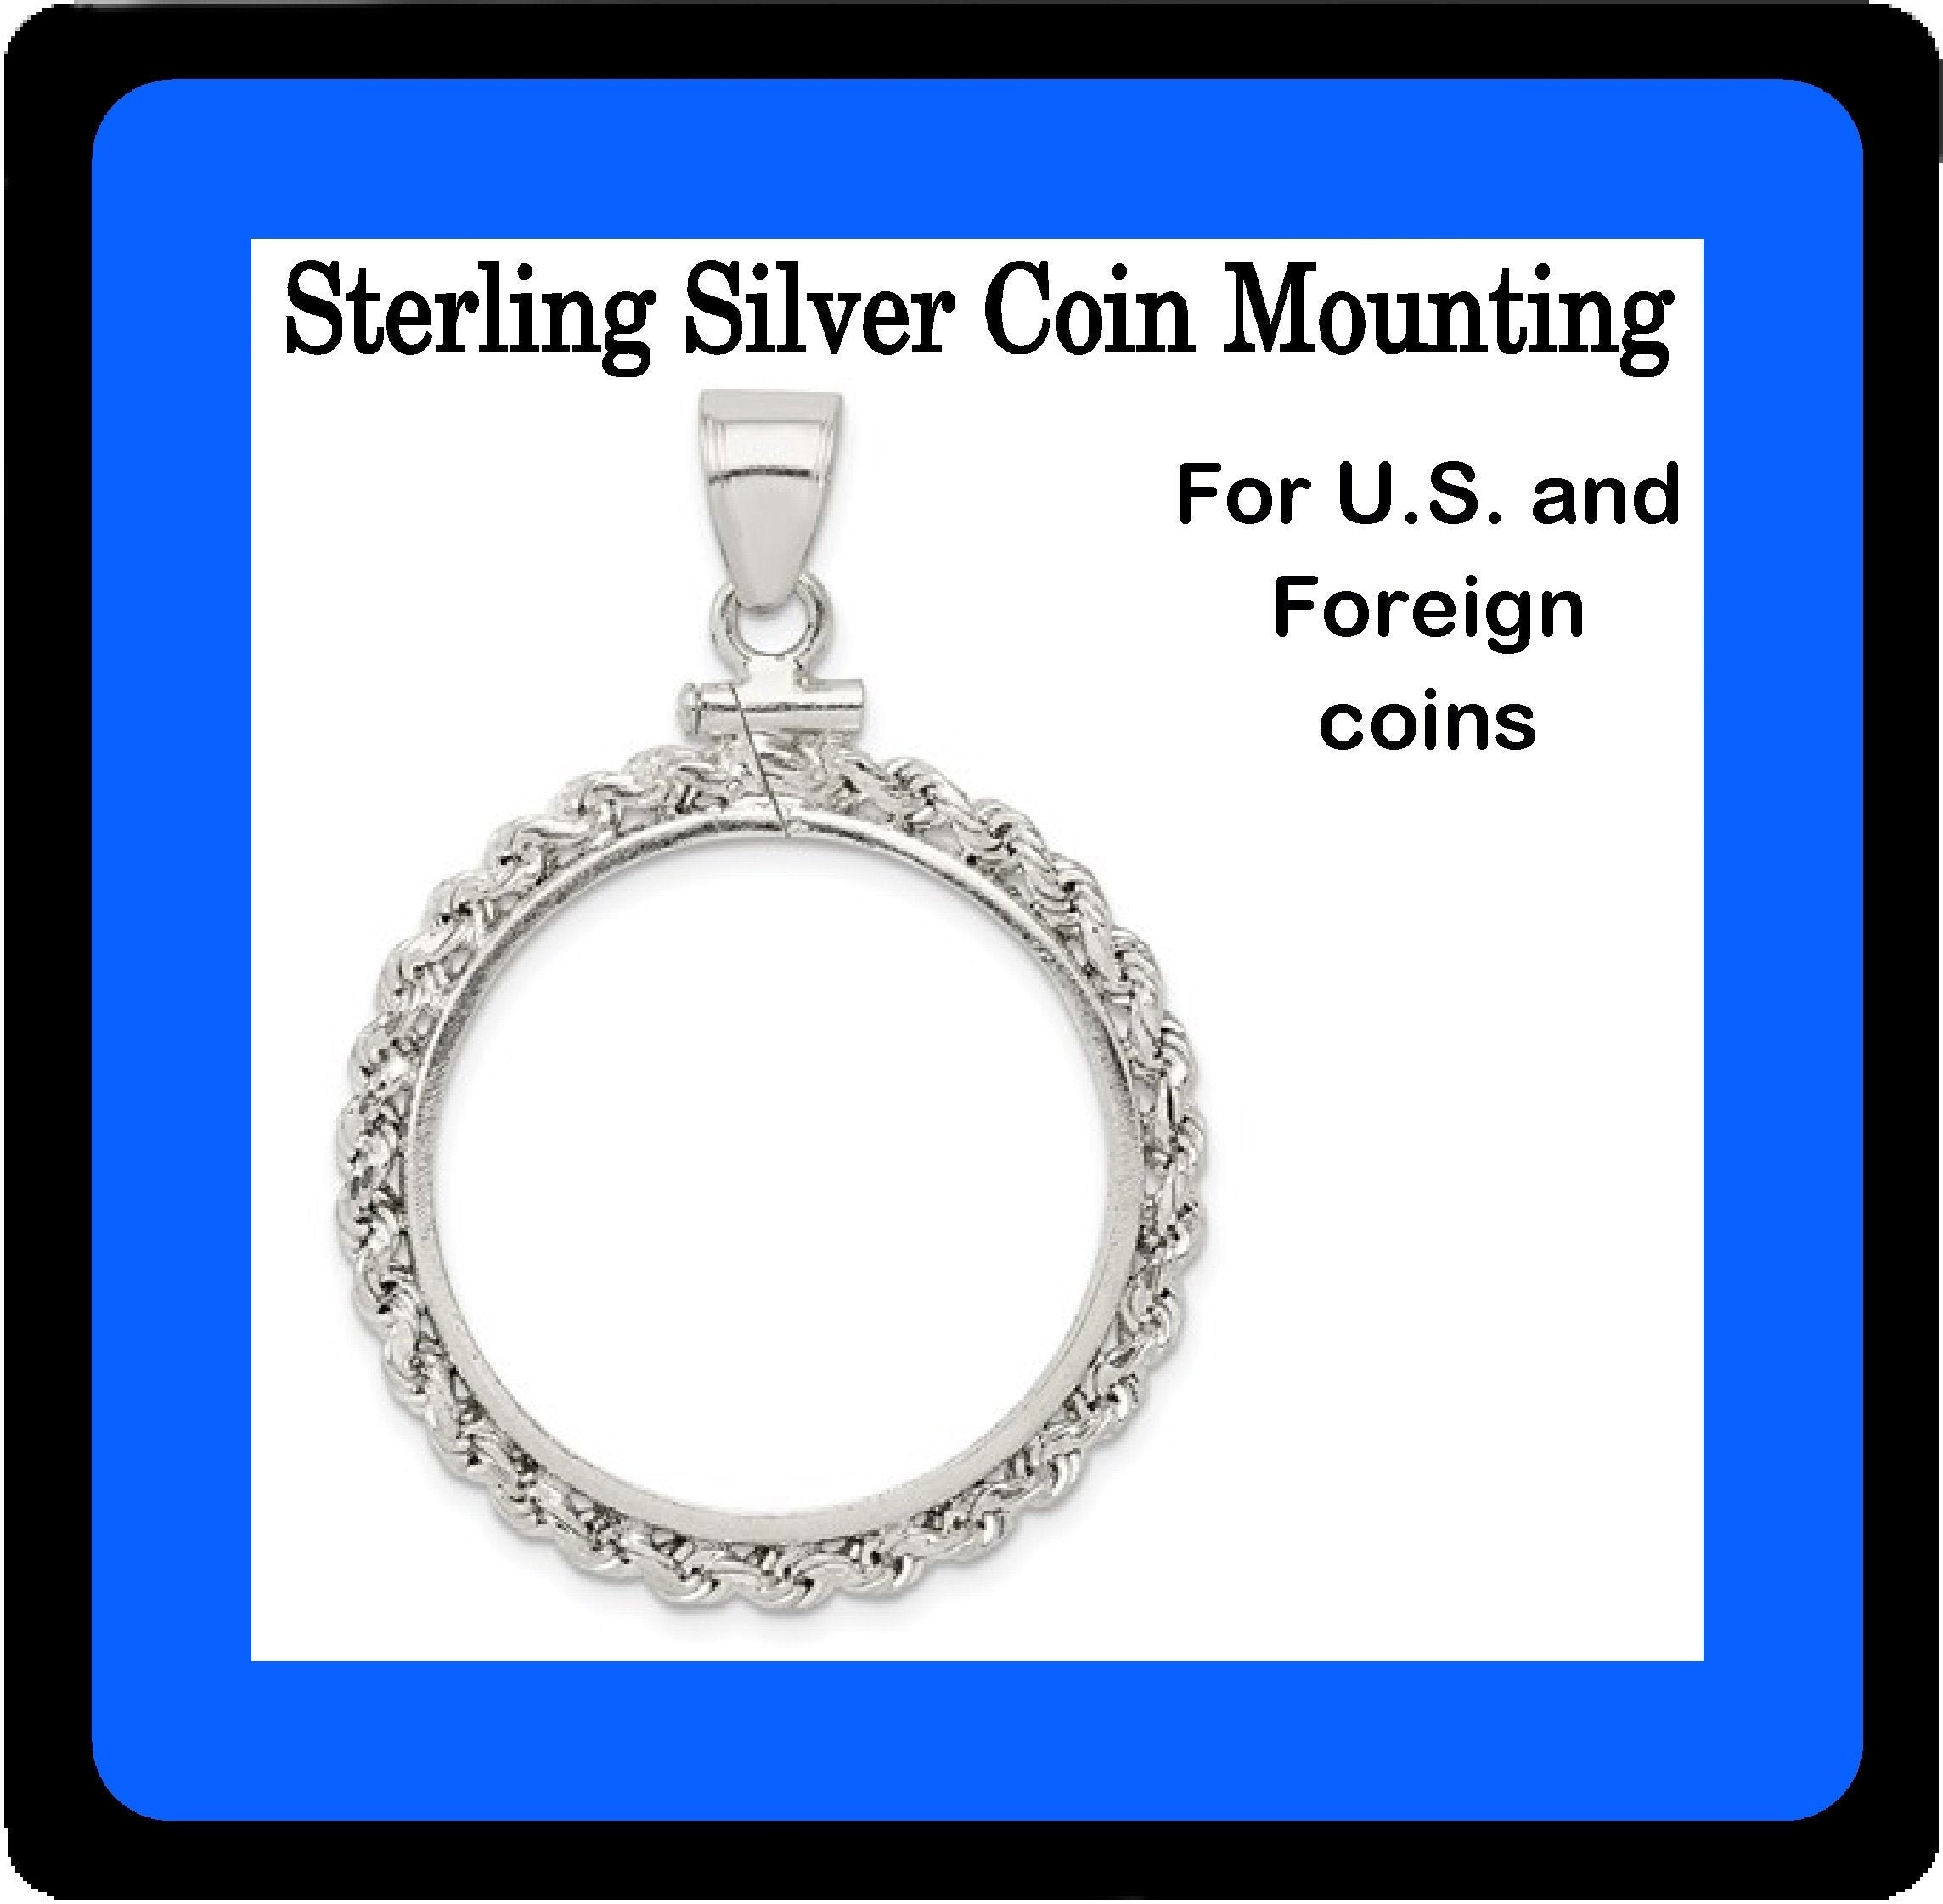 Indian Head Nickel Sterling Silver Coin Edge Coin Bezel Pendant 